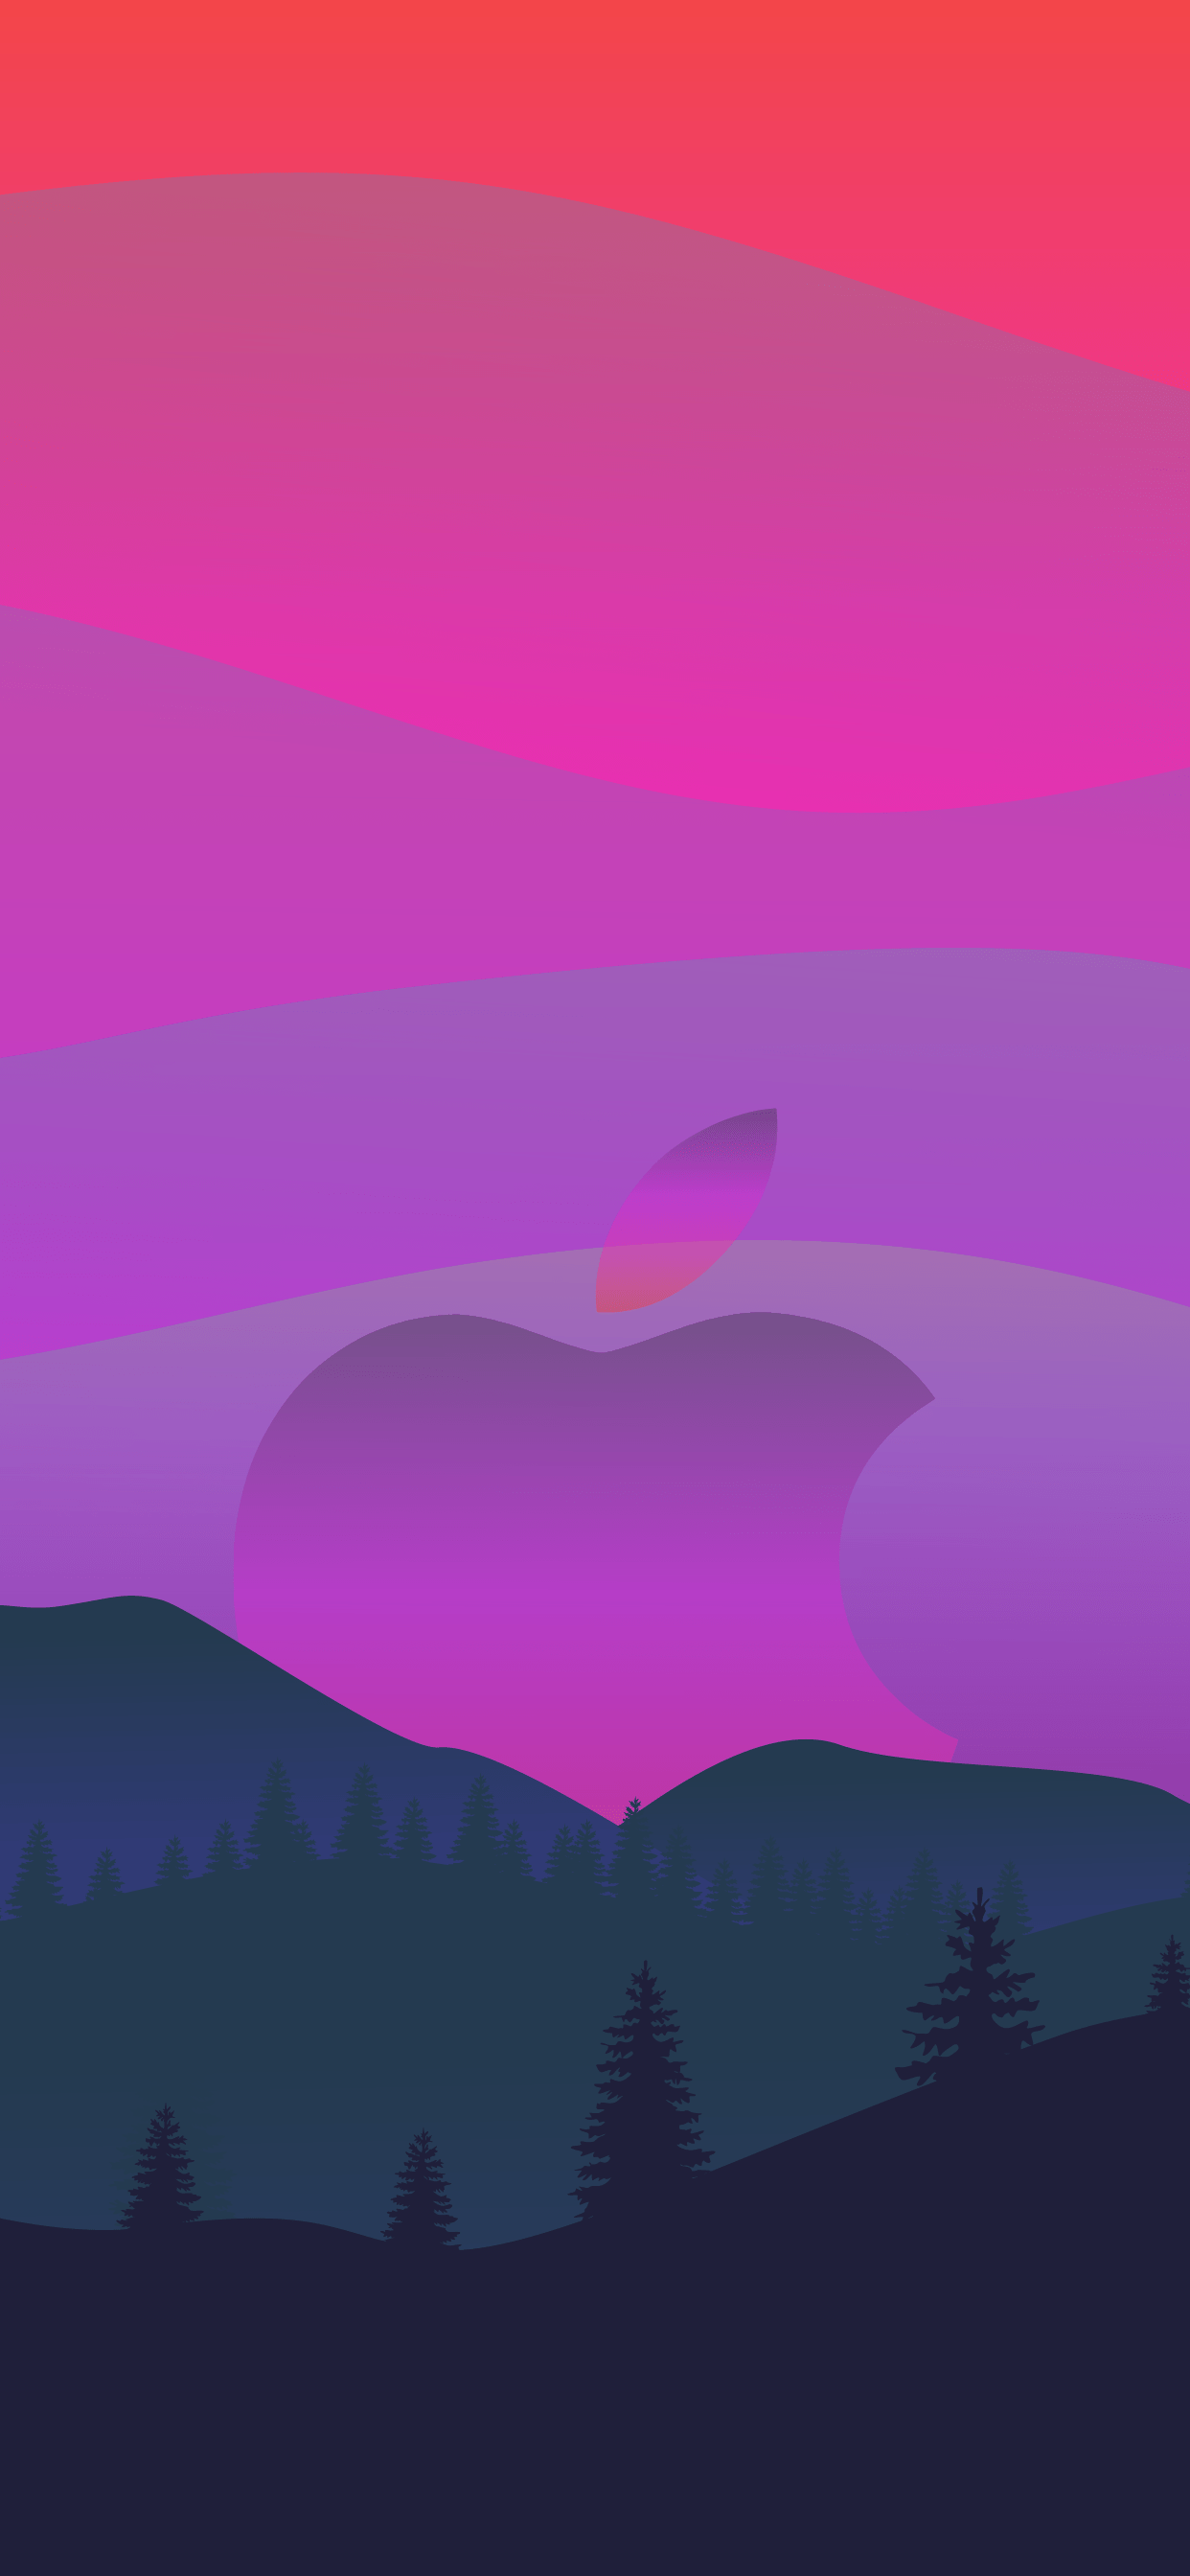 A purple and pink sunset with trees - Landscape